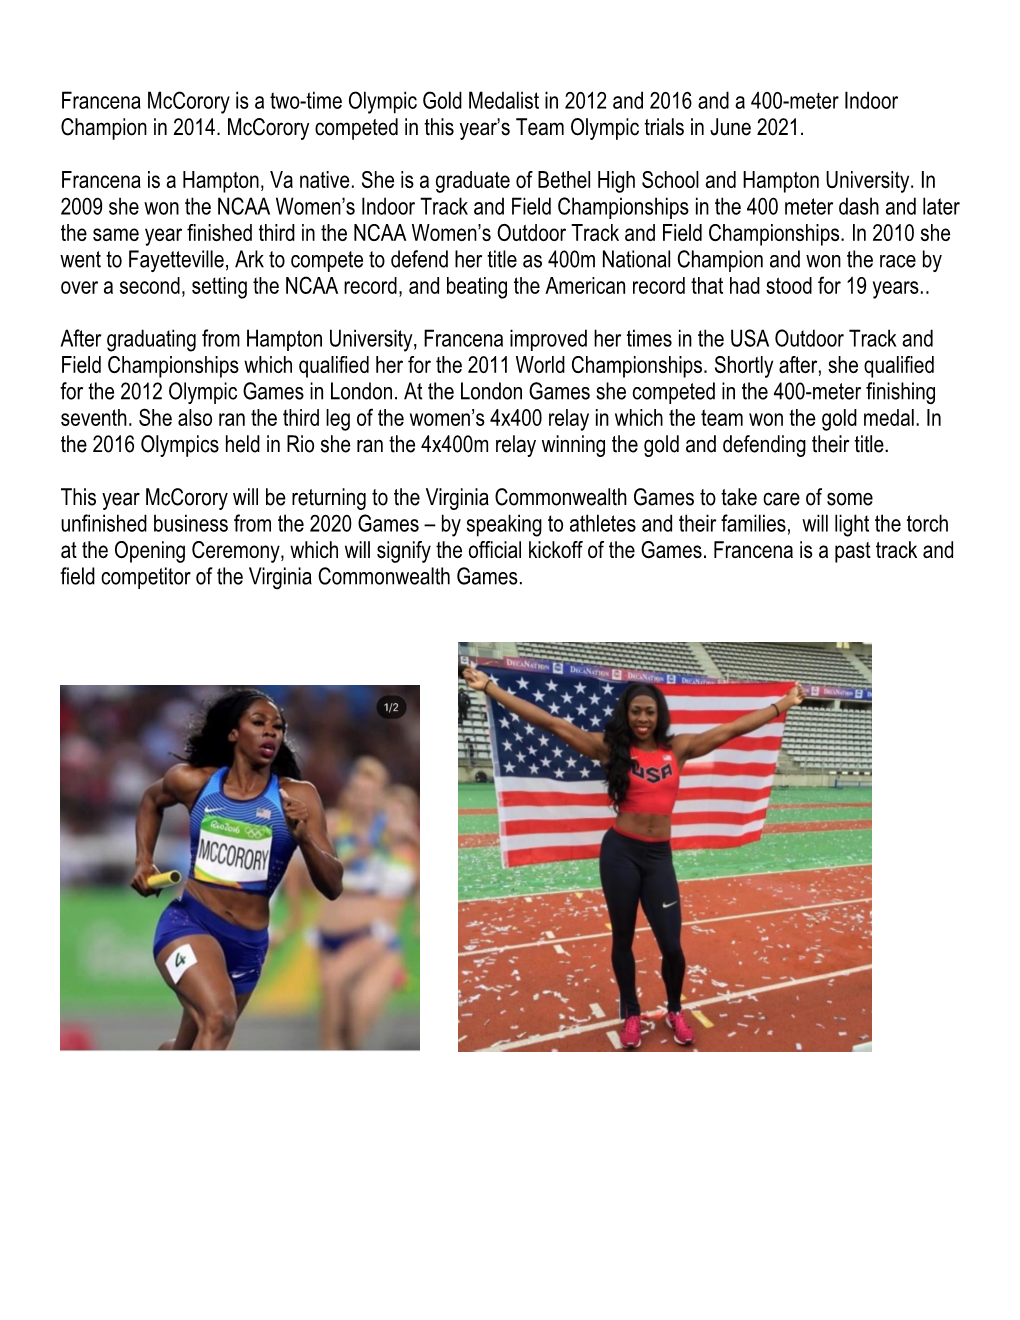 Francena Mccorory Is a Two-Time Olympic Gold Medalist in 2012 and 2016 and a 400-Meter Indoor Champion in 2014